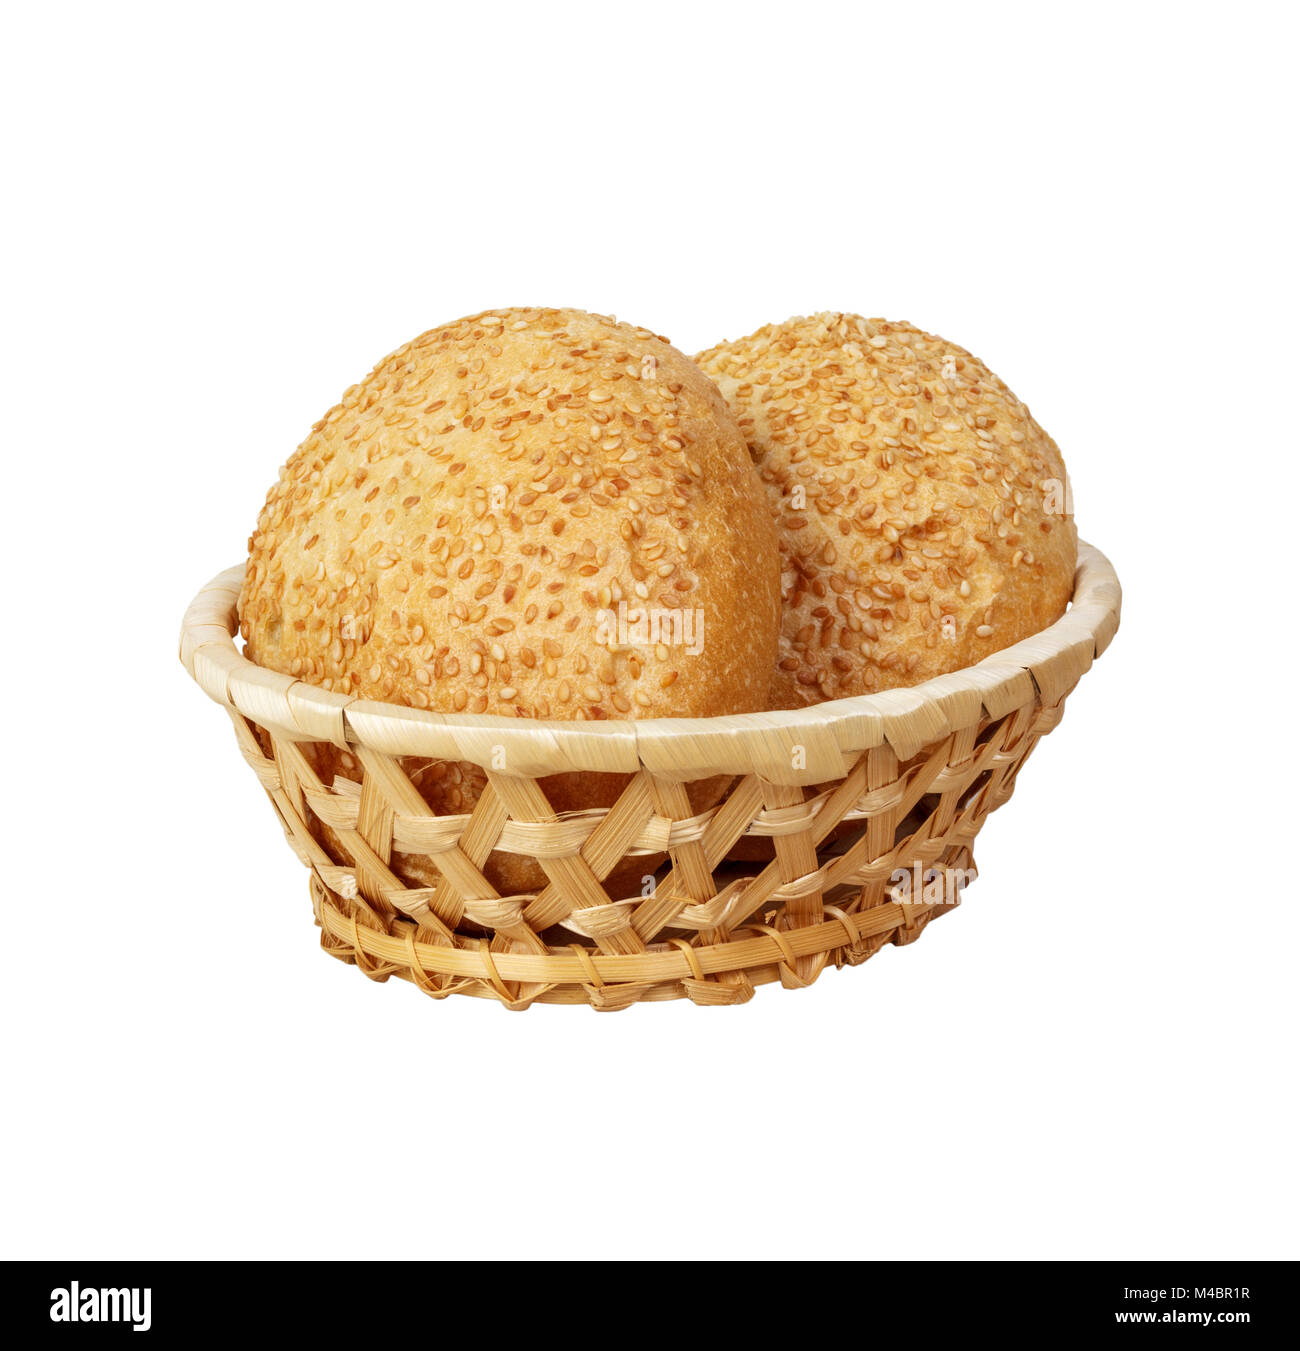 A fresh basket of golden brown hard crusted buns. Shot on white background. Stock Photo